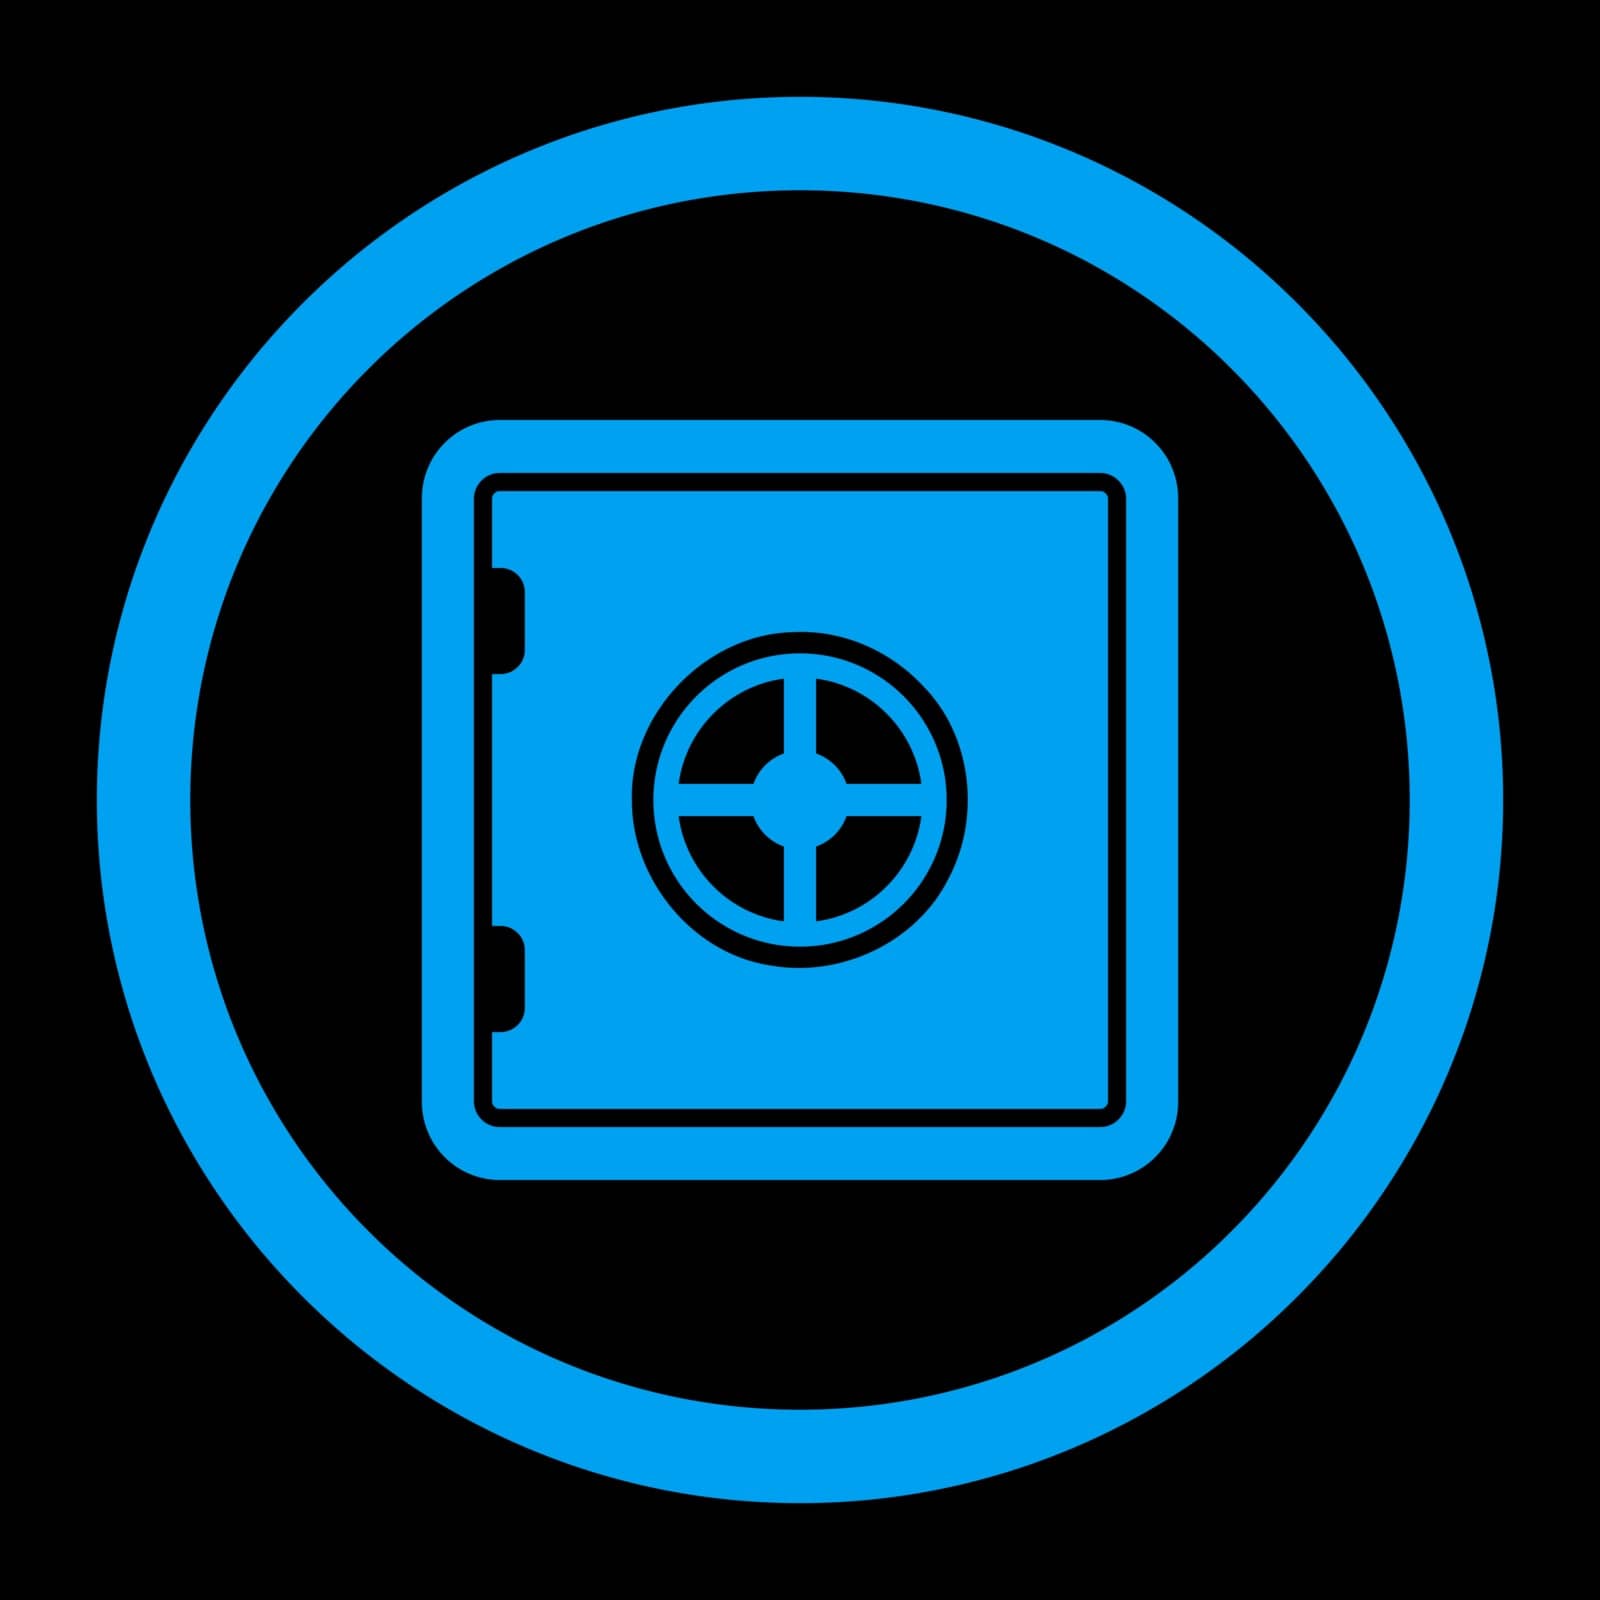 Safe vector icon. This flat rounded symbol uses blue color and isolated on a black background.